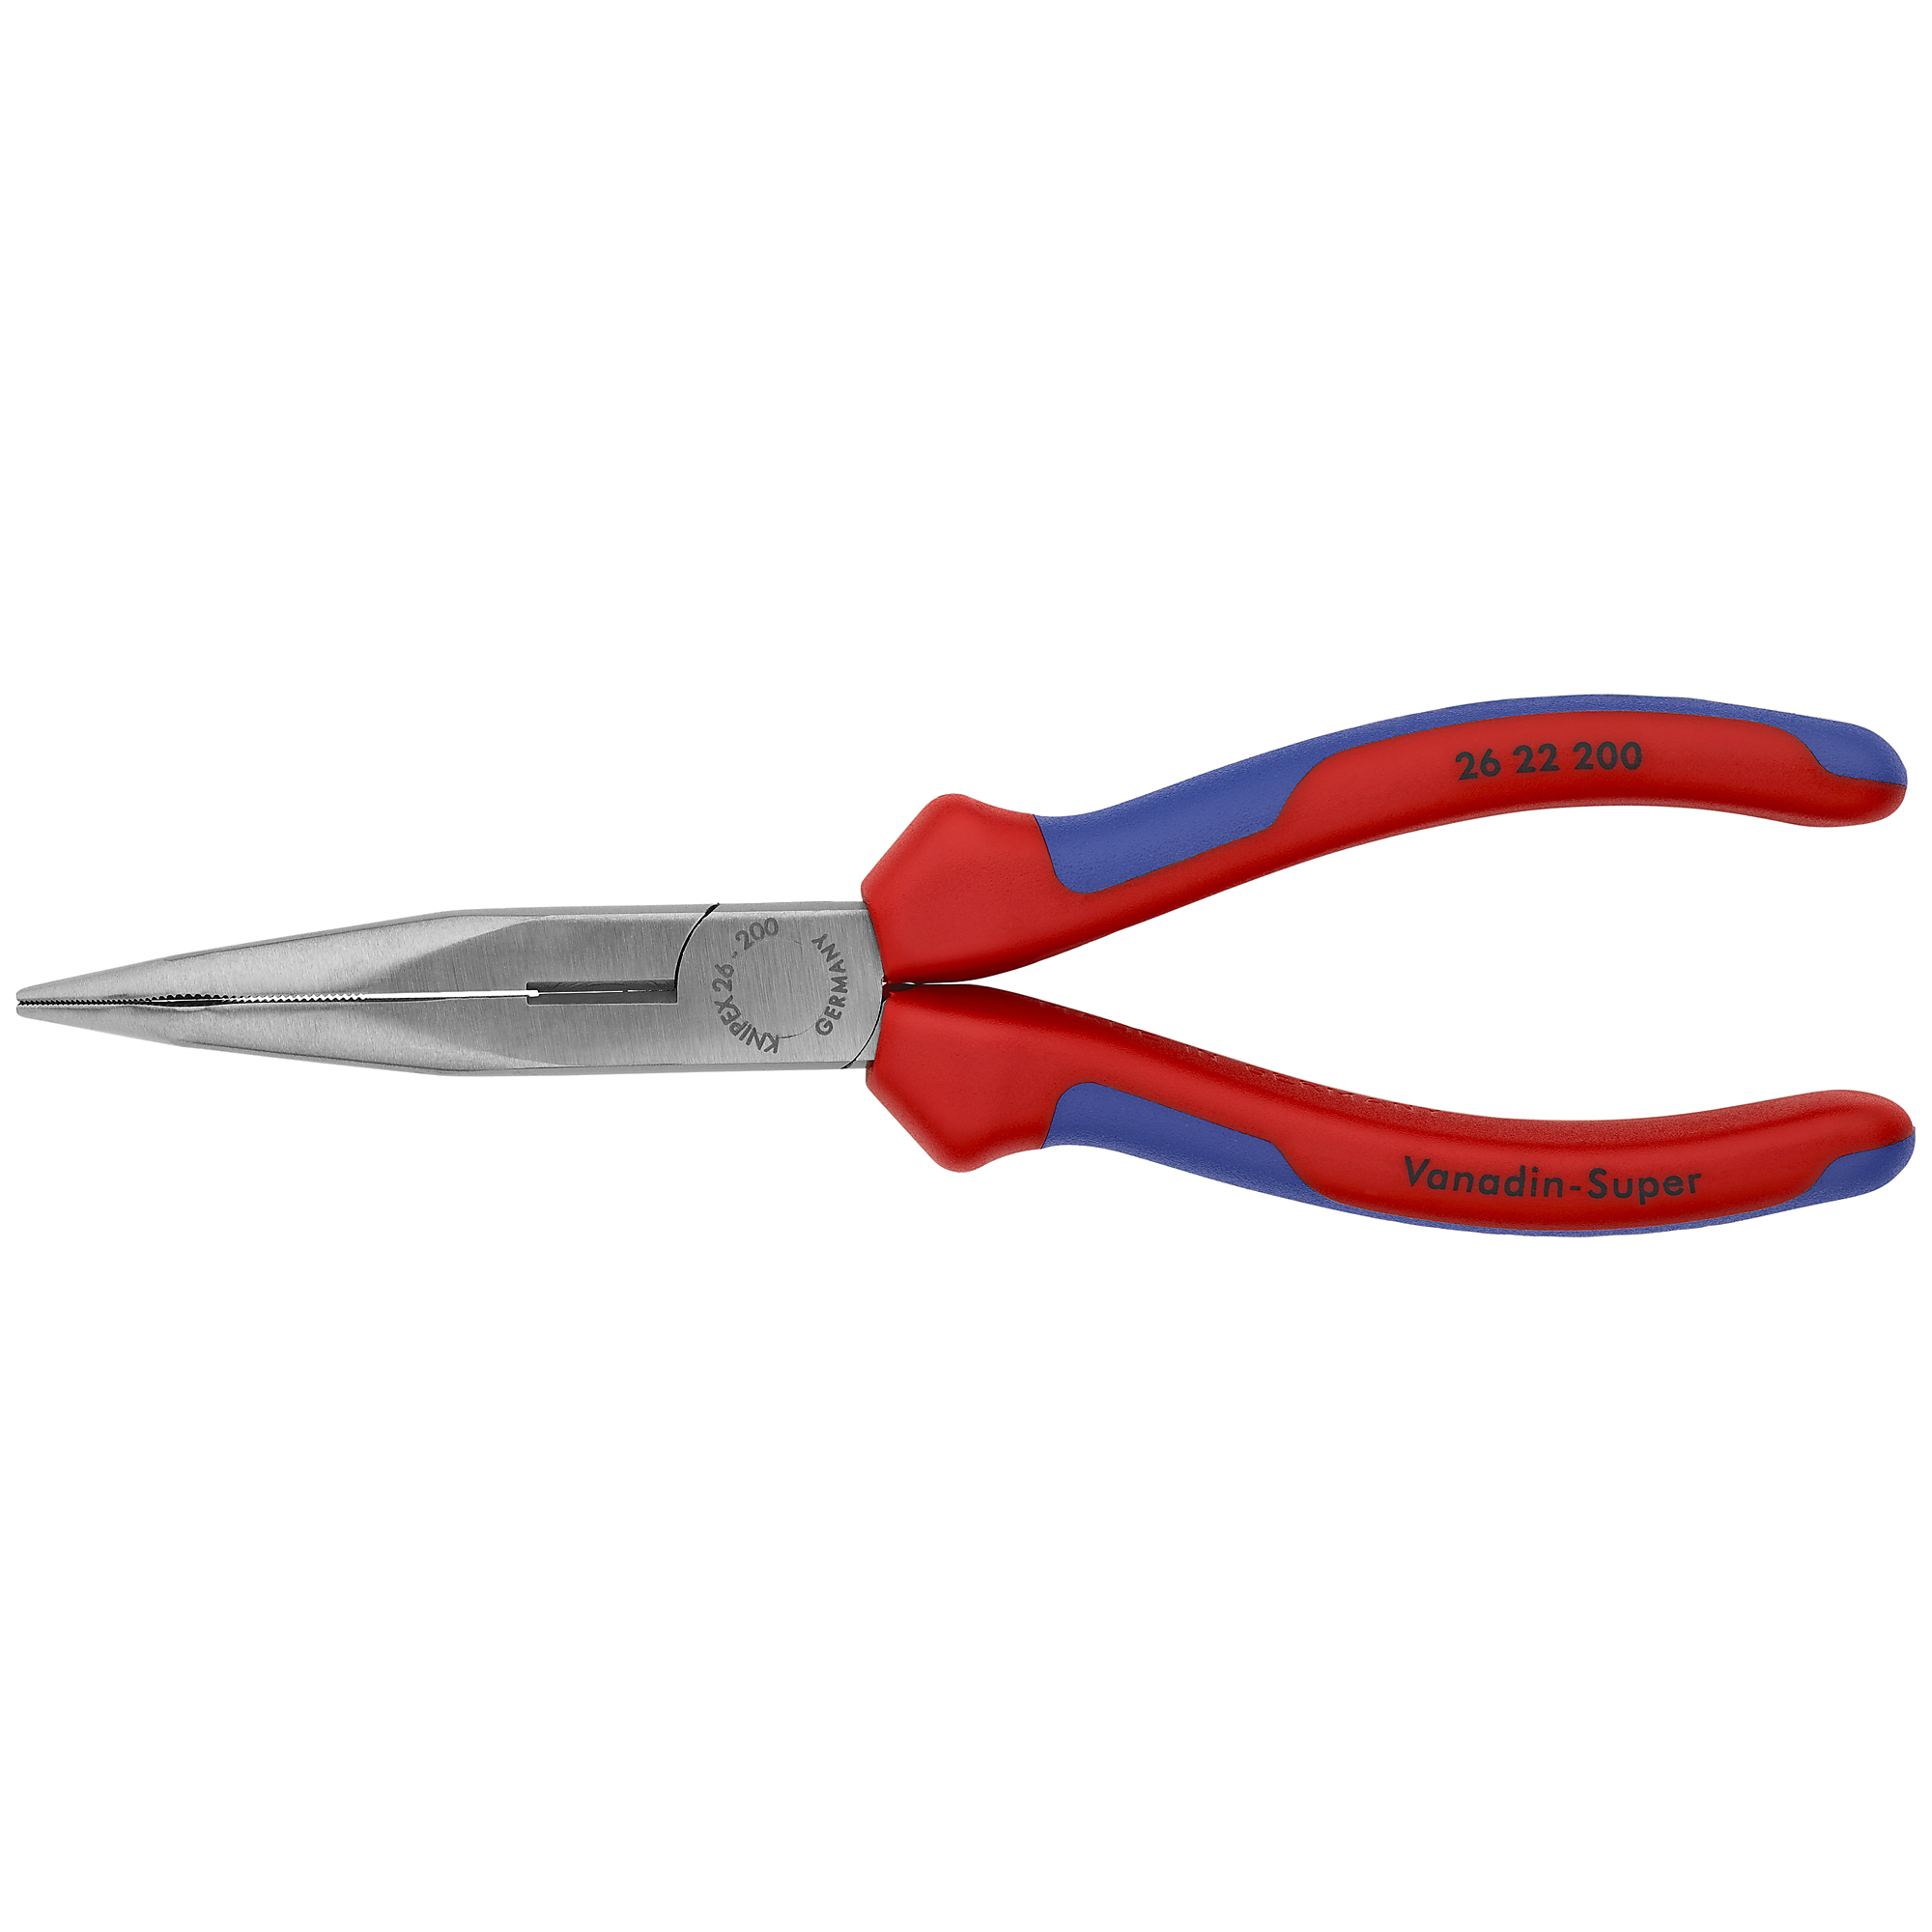 KNIPEX, Long Nose 40Â° Angled Pliers w/Cutter, Bulk, 8Inch, Pieces (qty.) 1 Material Steel, Jaw Capacity 0.125 in, Model 26 22 200